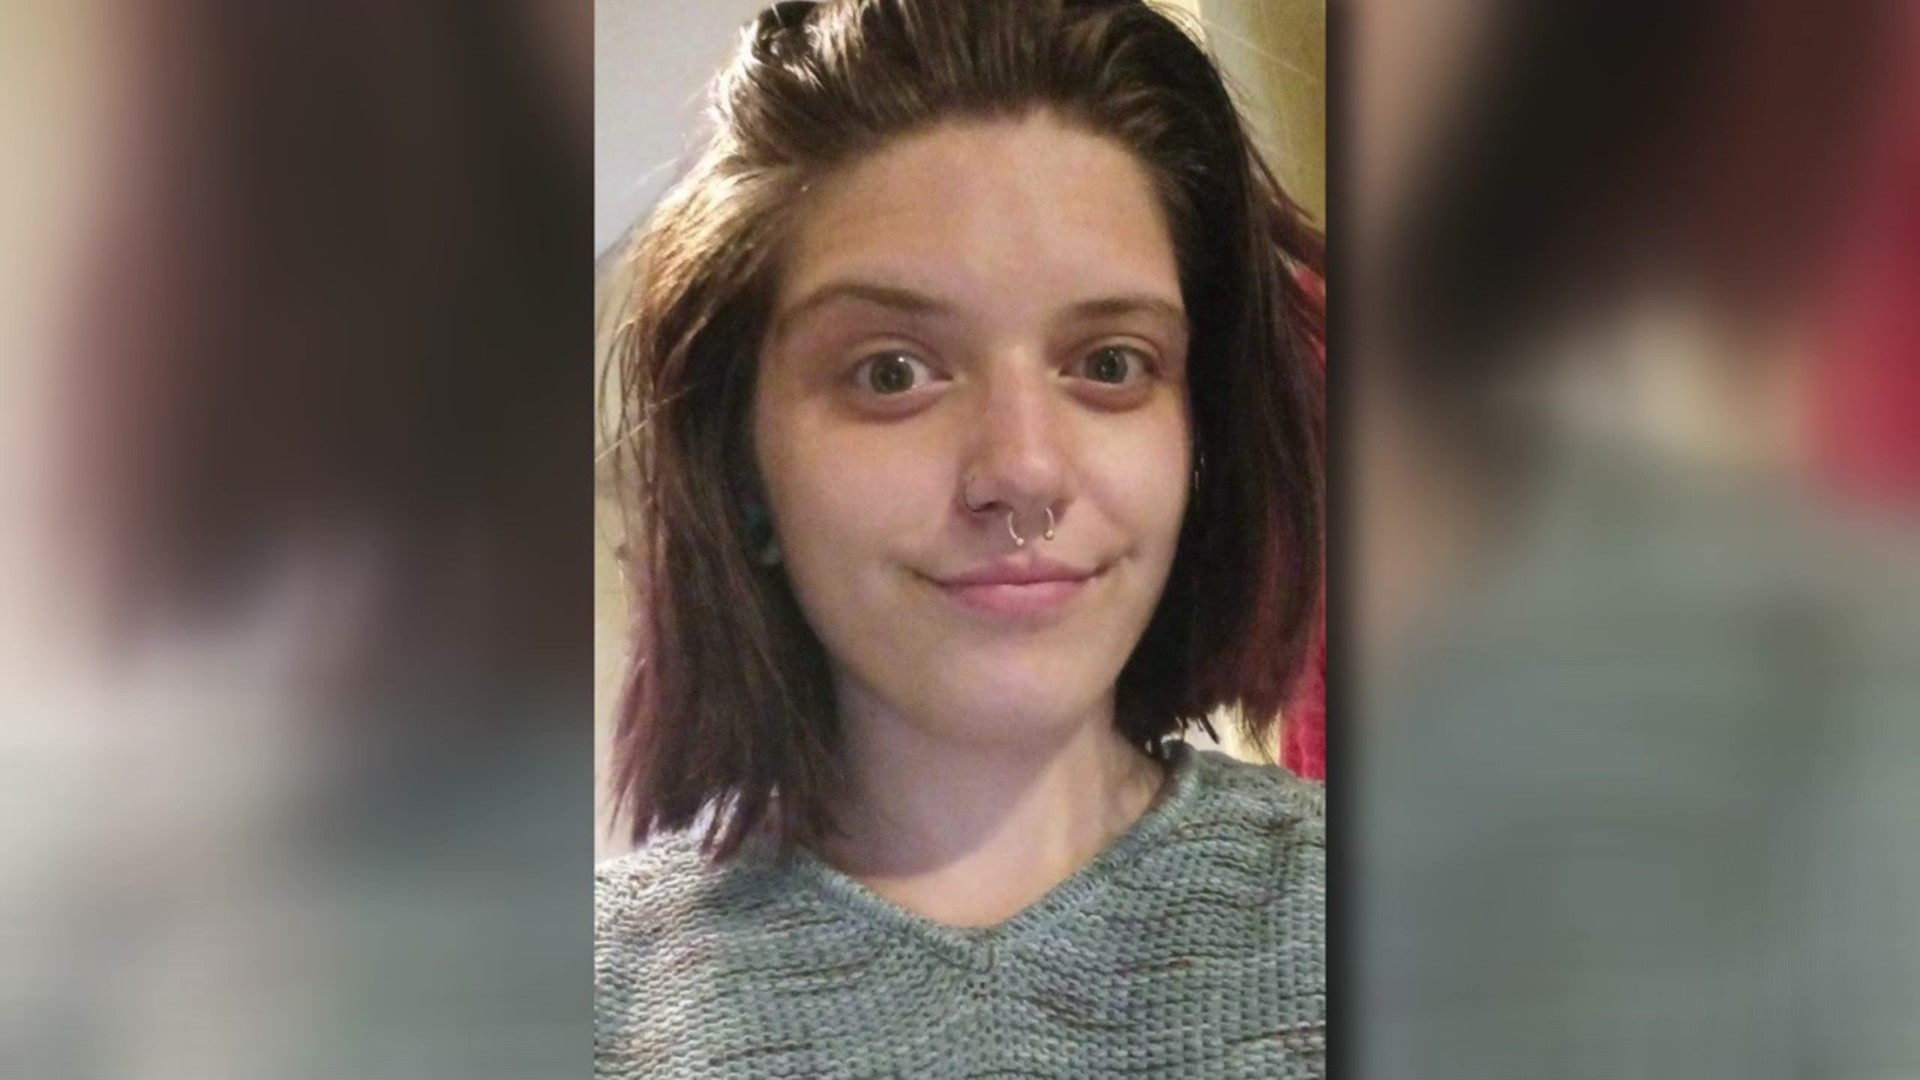 Cheyenne Swartz, 21, was hospitalized Friday night after being found in critical condition.